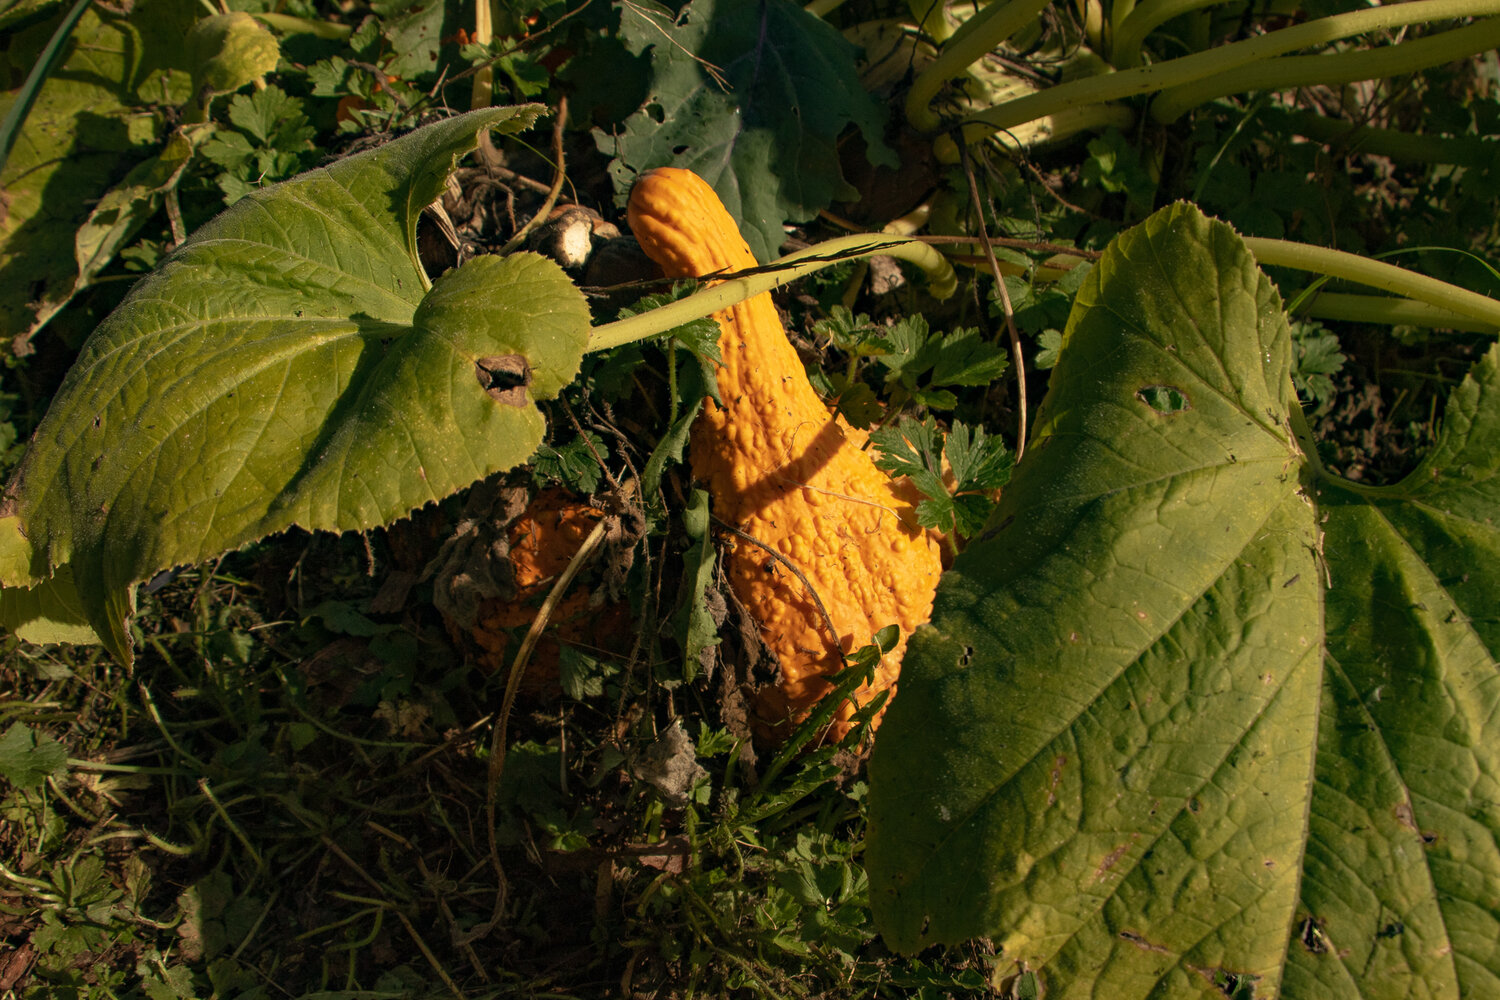 A squash is seen growing in a "food forest" garden at LaCamas Creek Farm on Sunday, Oct. 8.